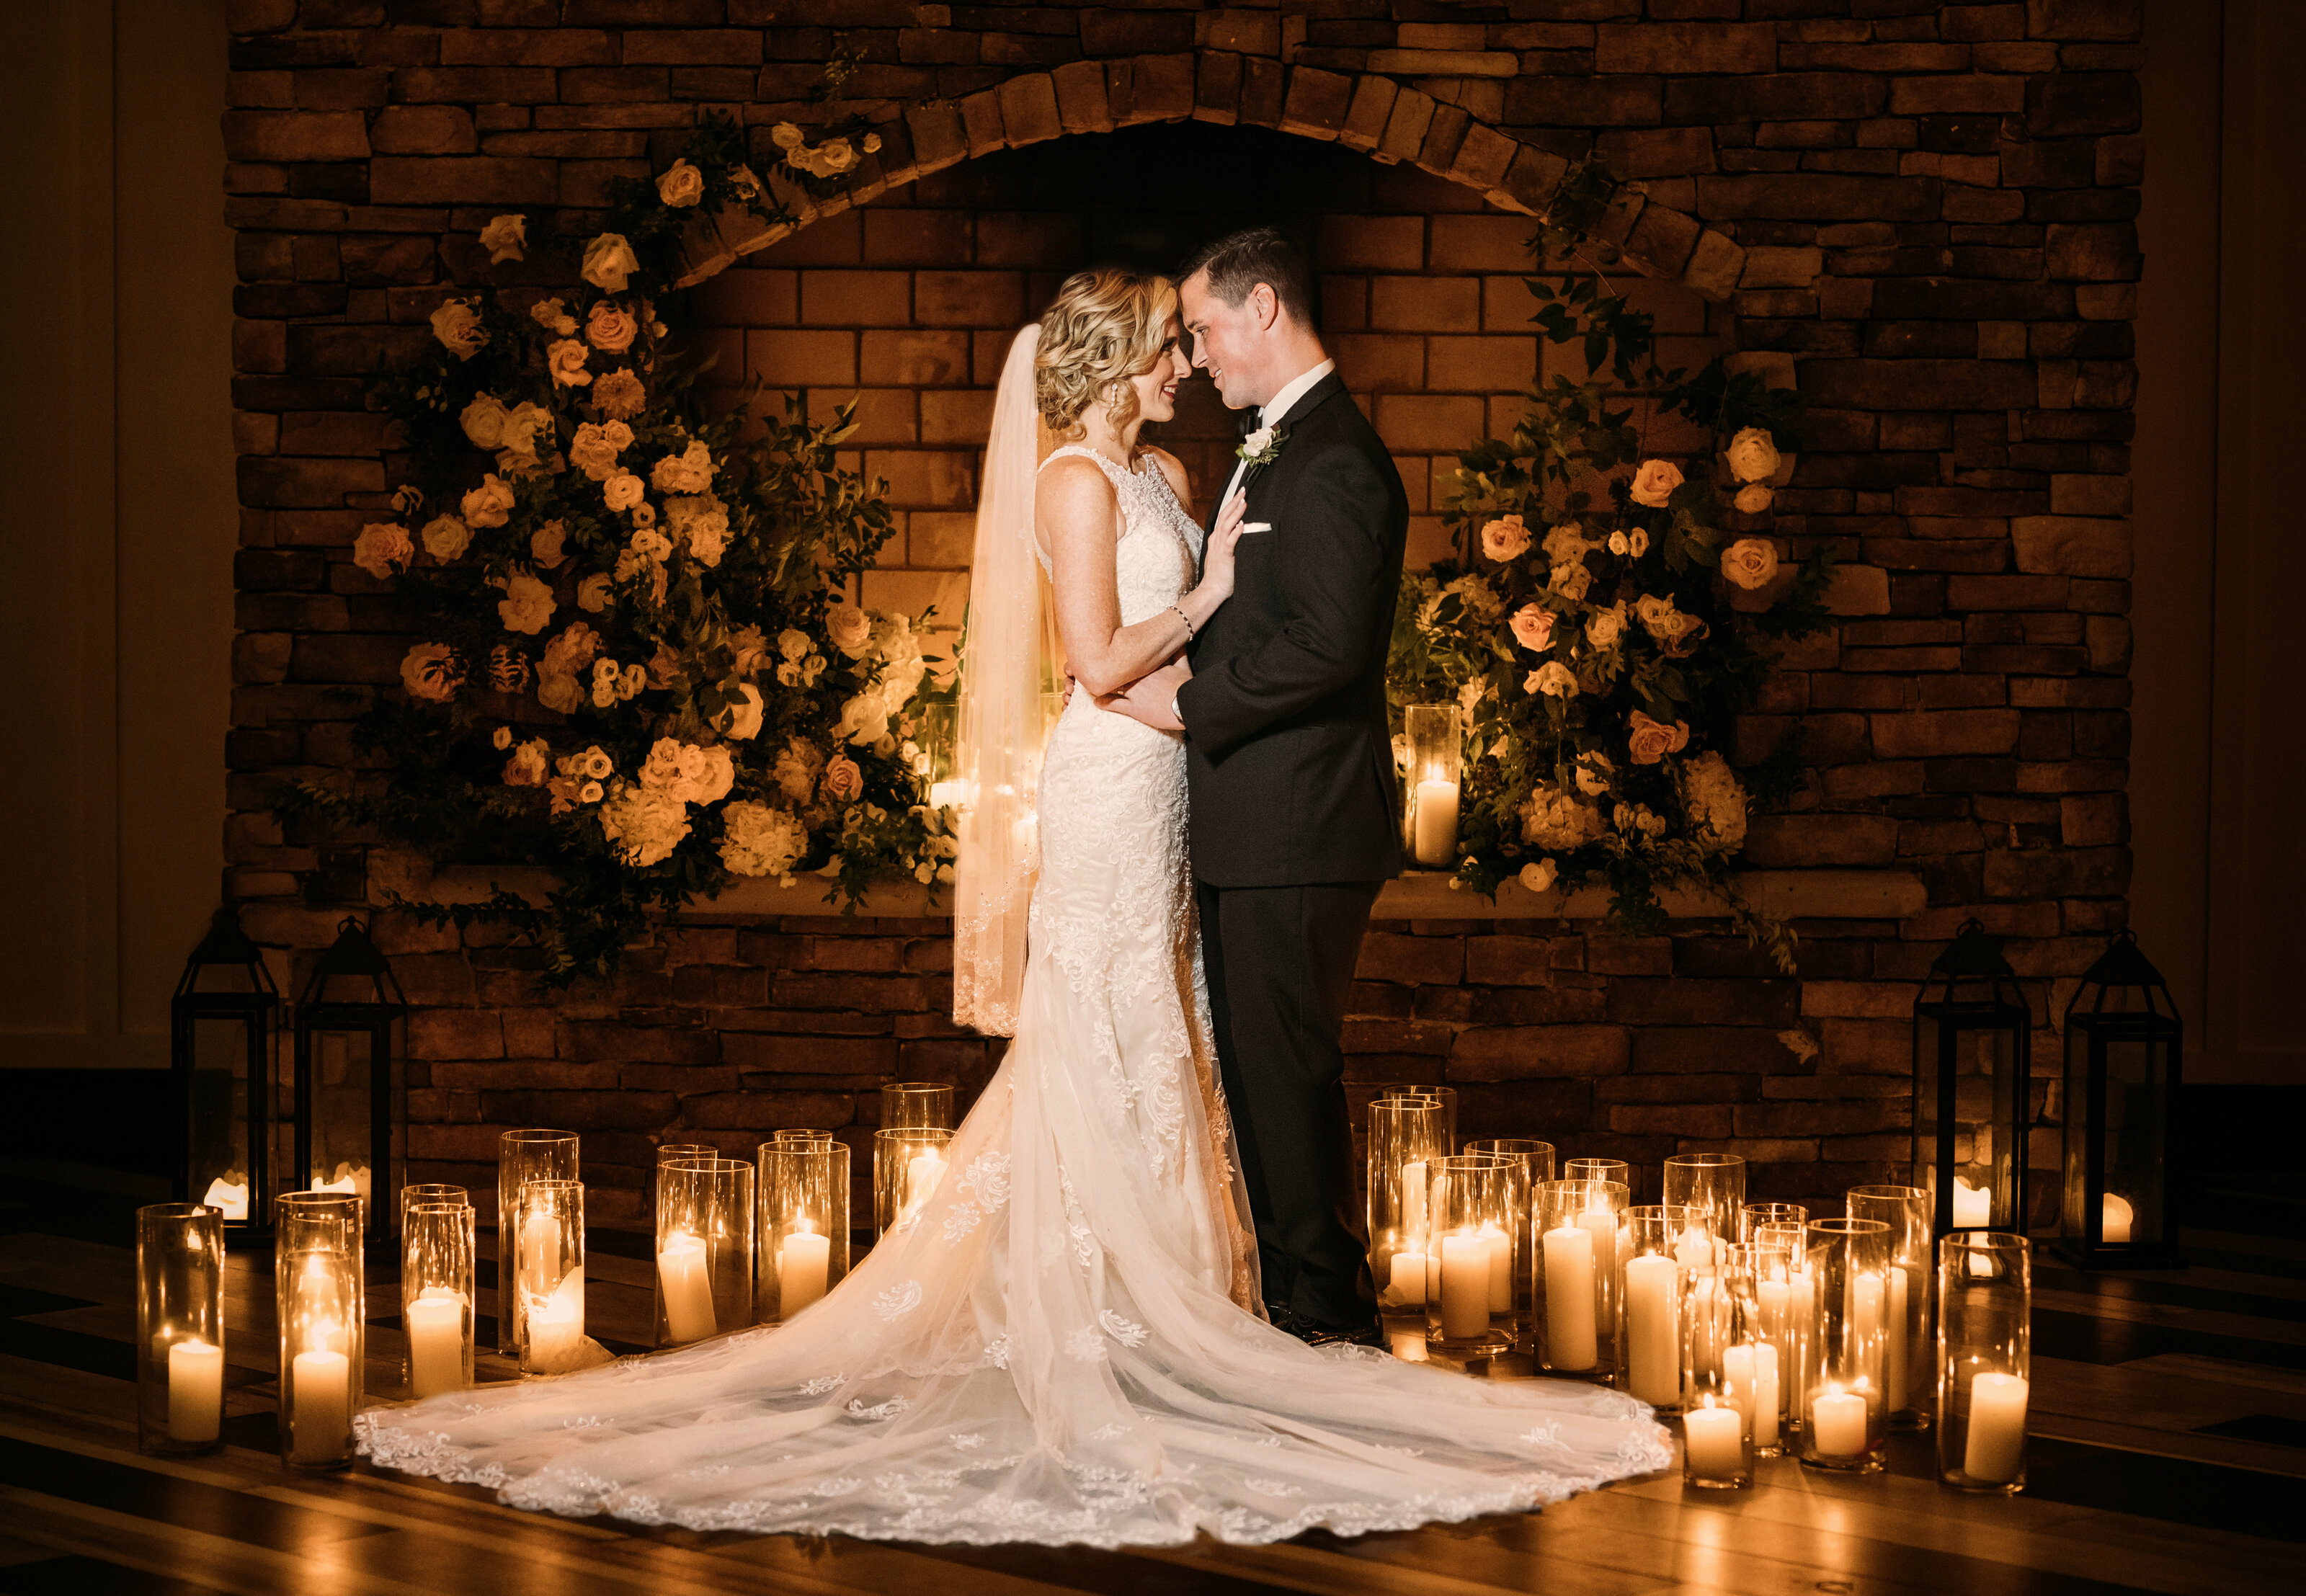 Bride and groom embrace for romantic photo at their NJ wedding